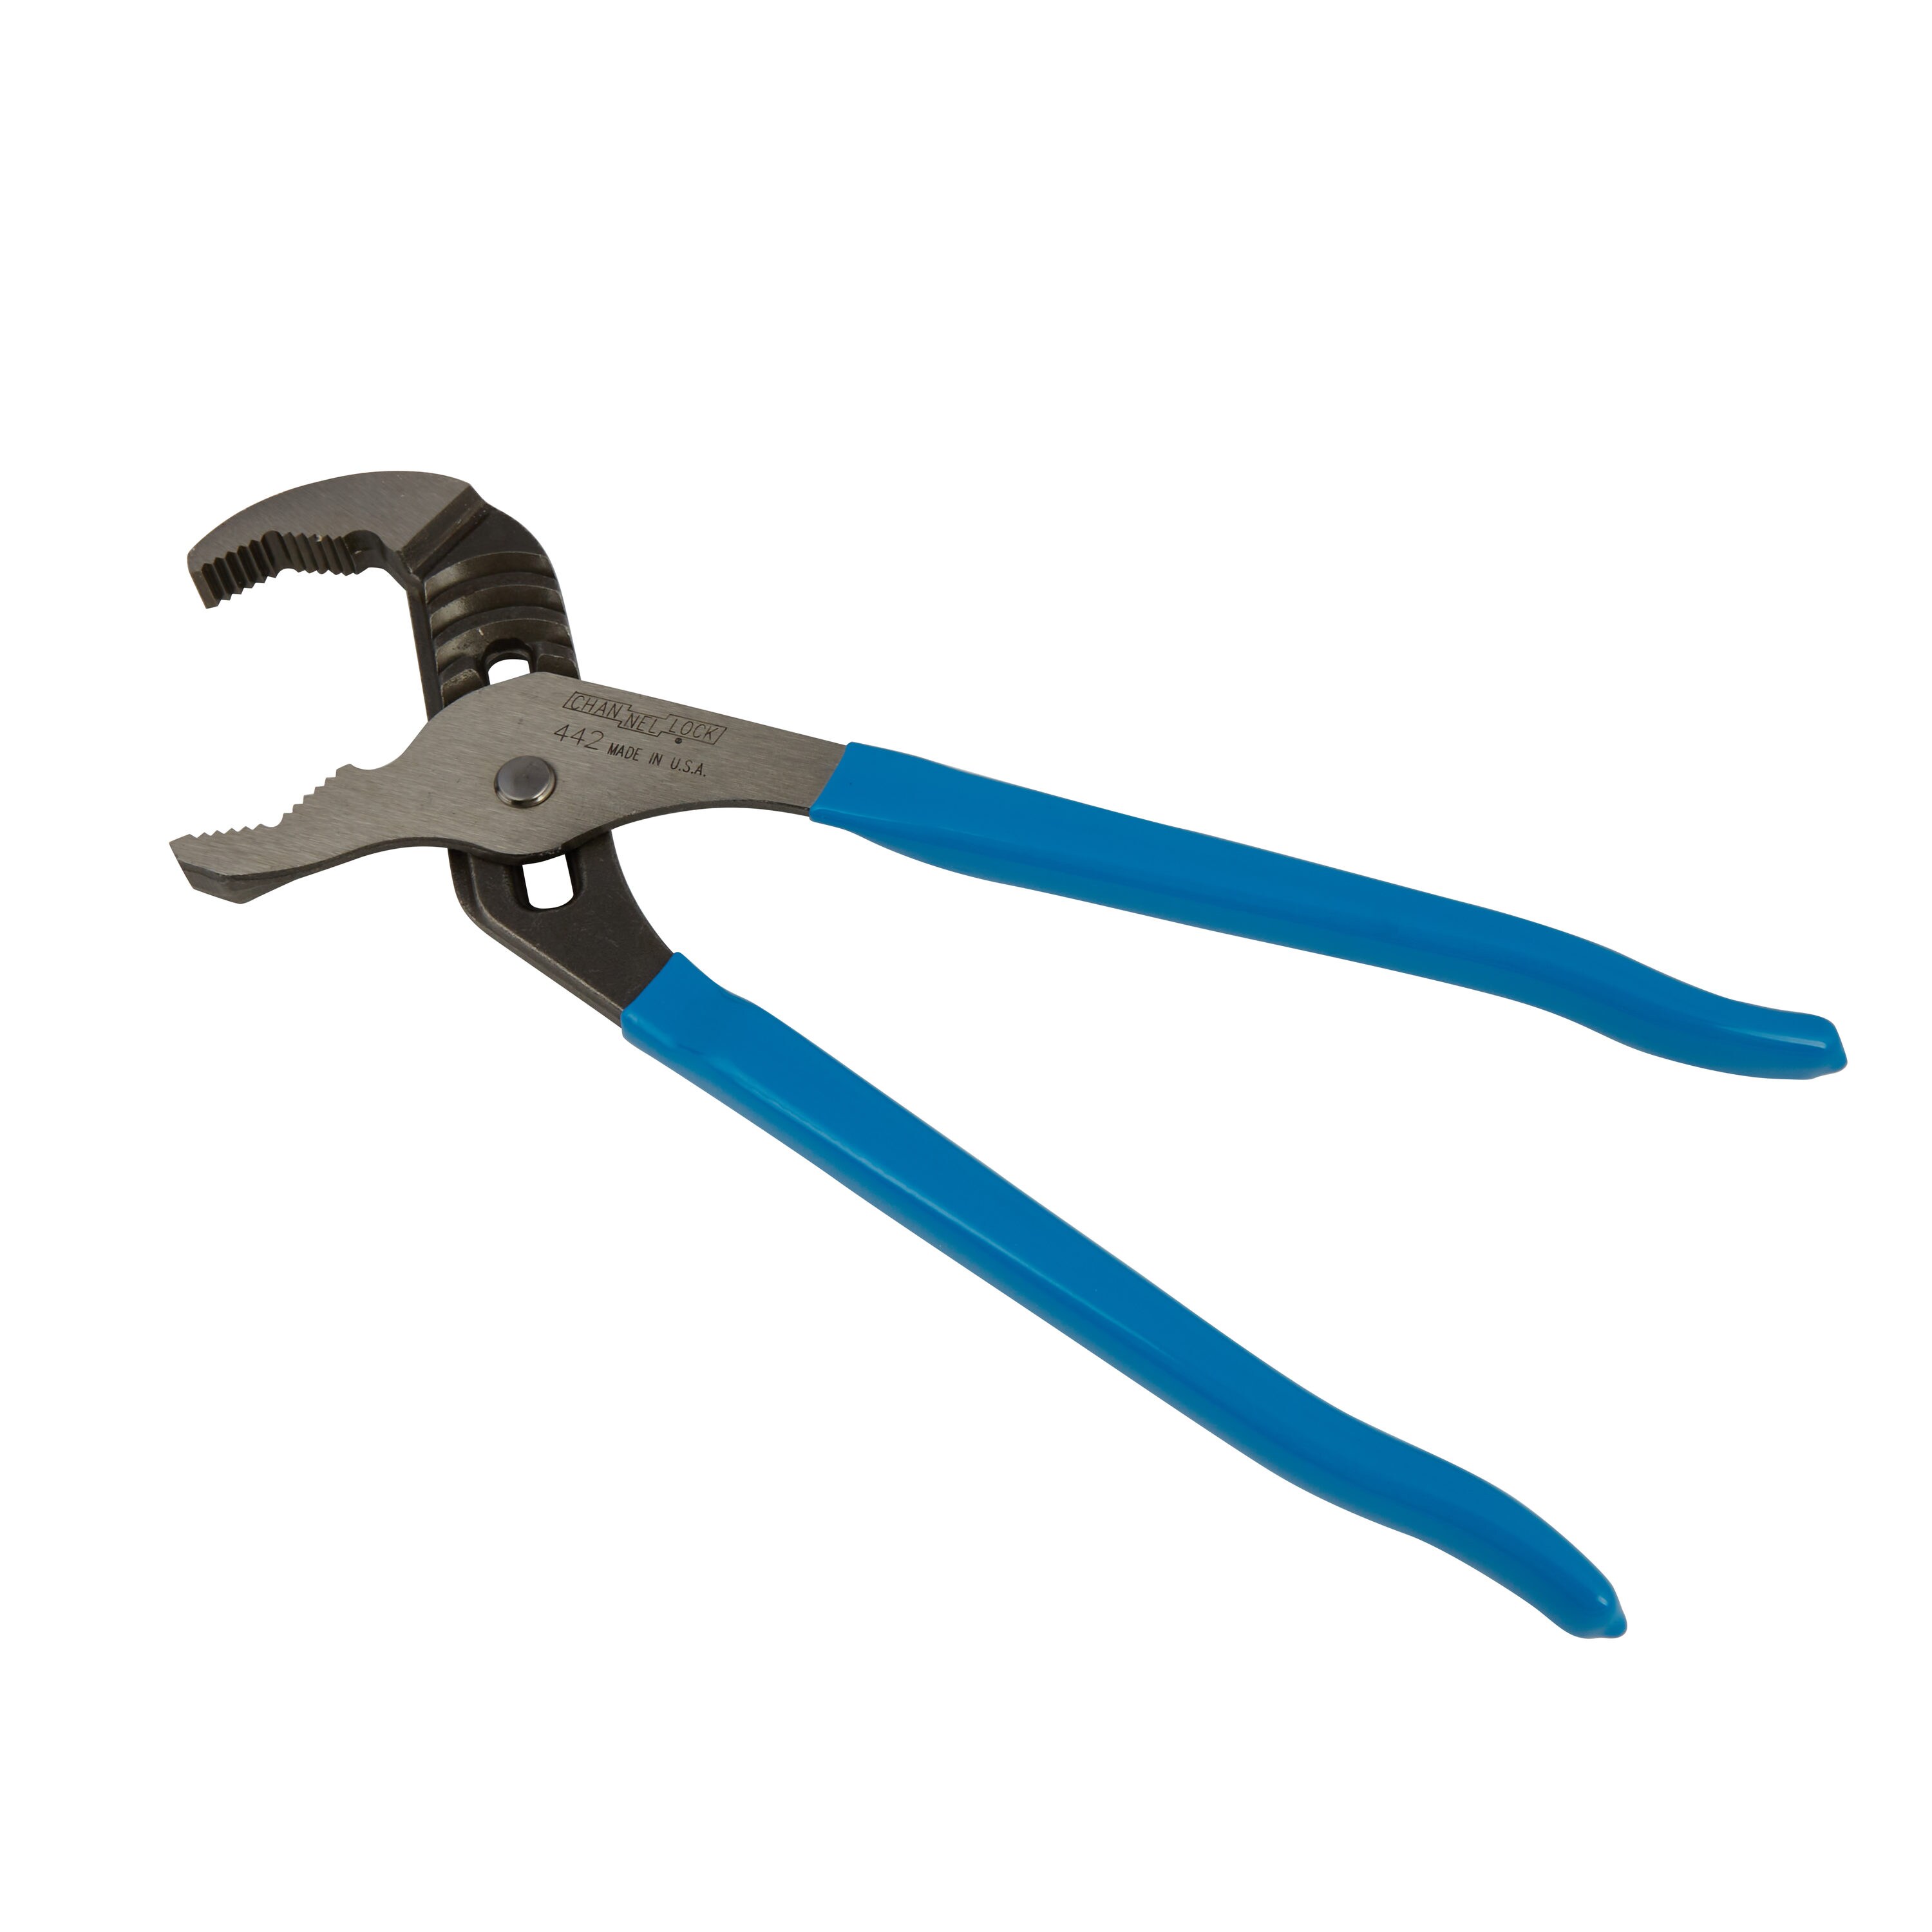 Channellock 442 Tongue & Groove Pliers12" V-Jaw Groove Joint Pliers 